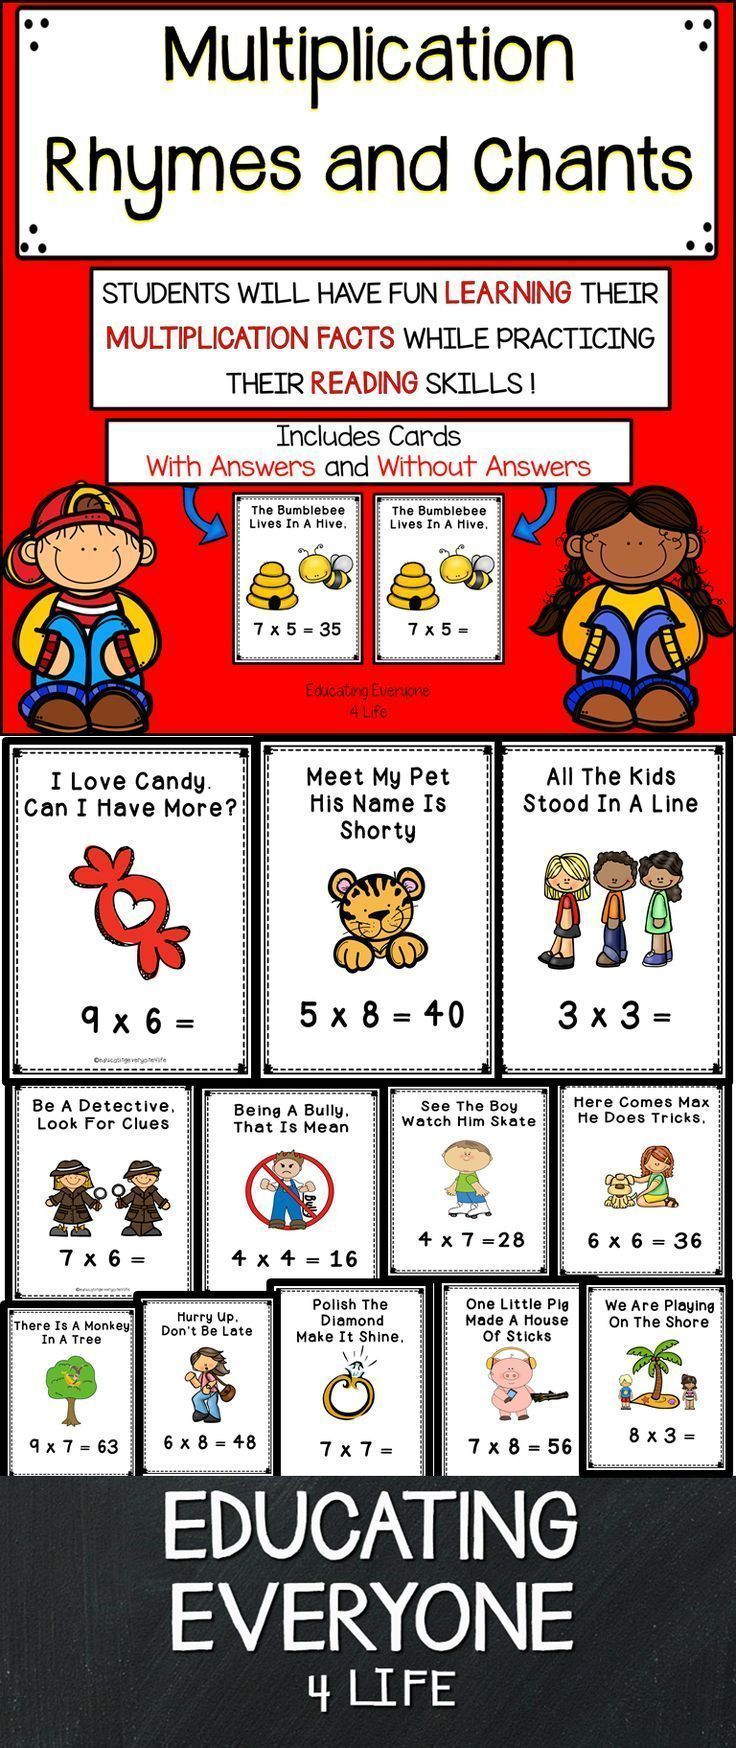 Multiplication Rhymes And Chants | Multiplication Facts with regard to Free Printable Multiplication Rhymes